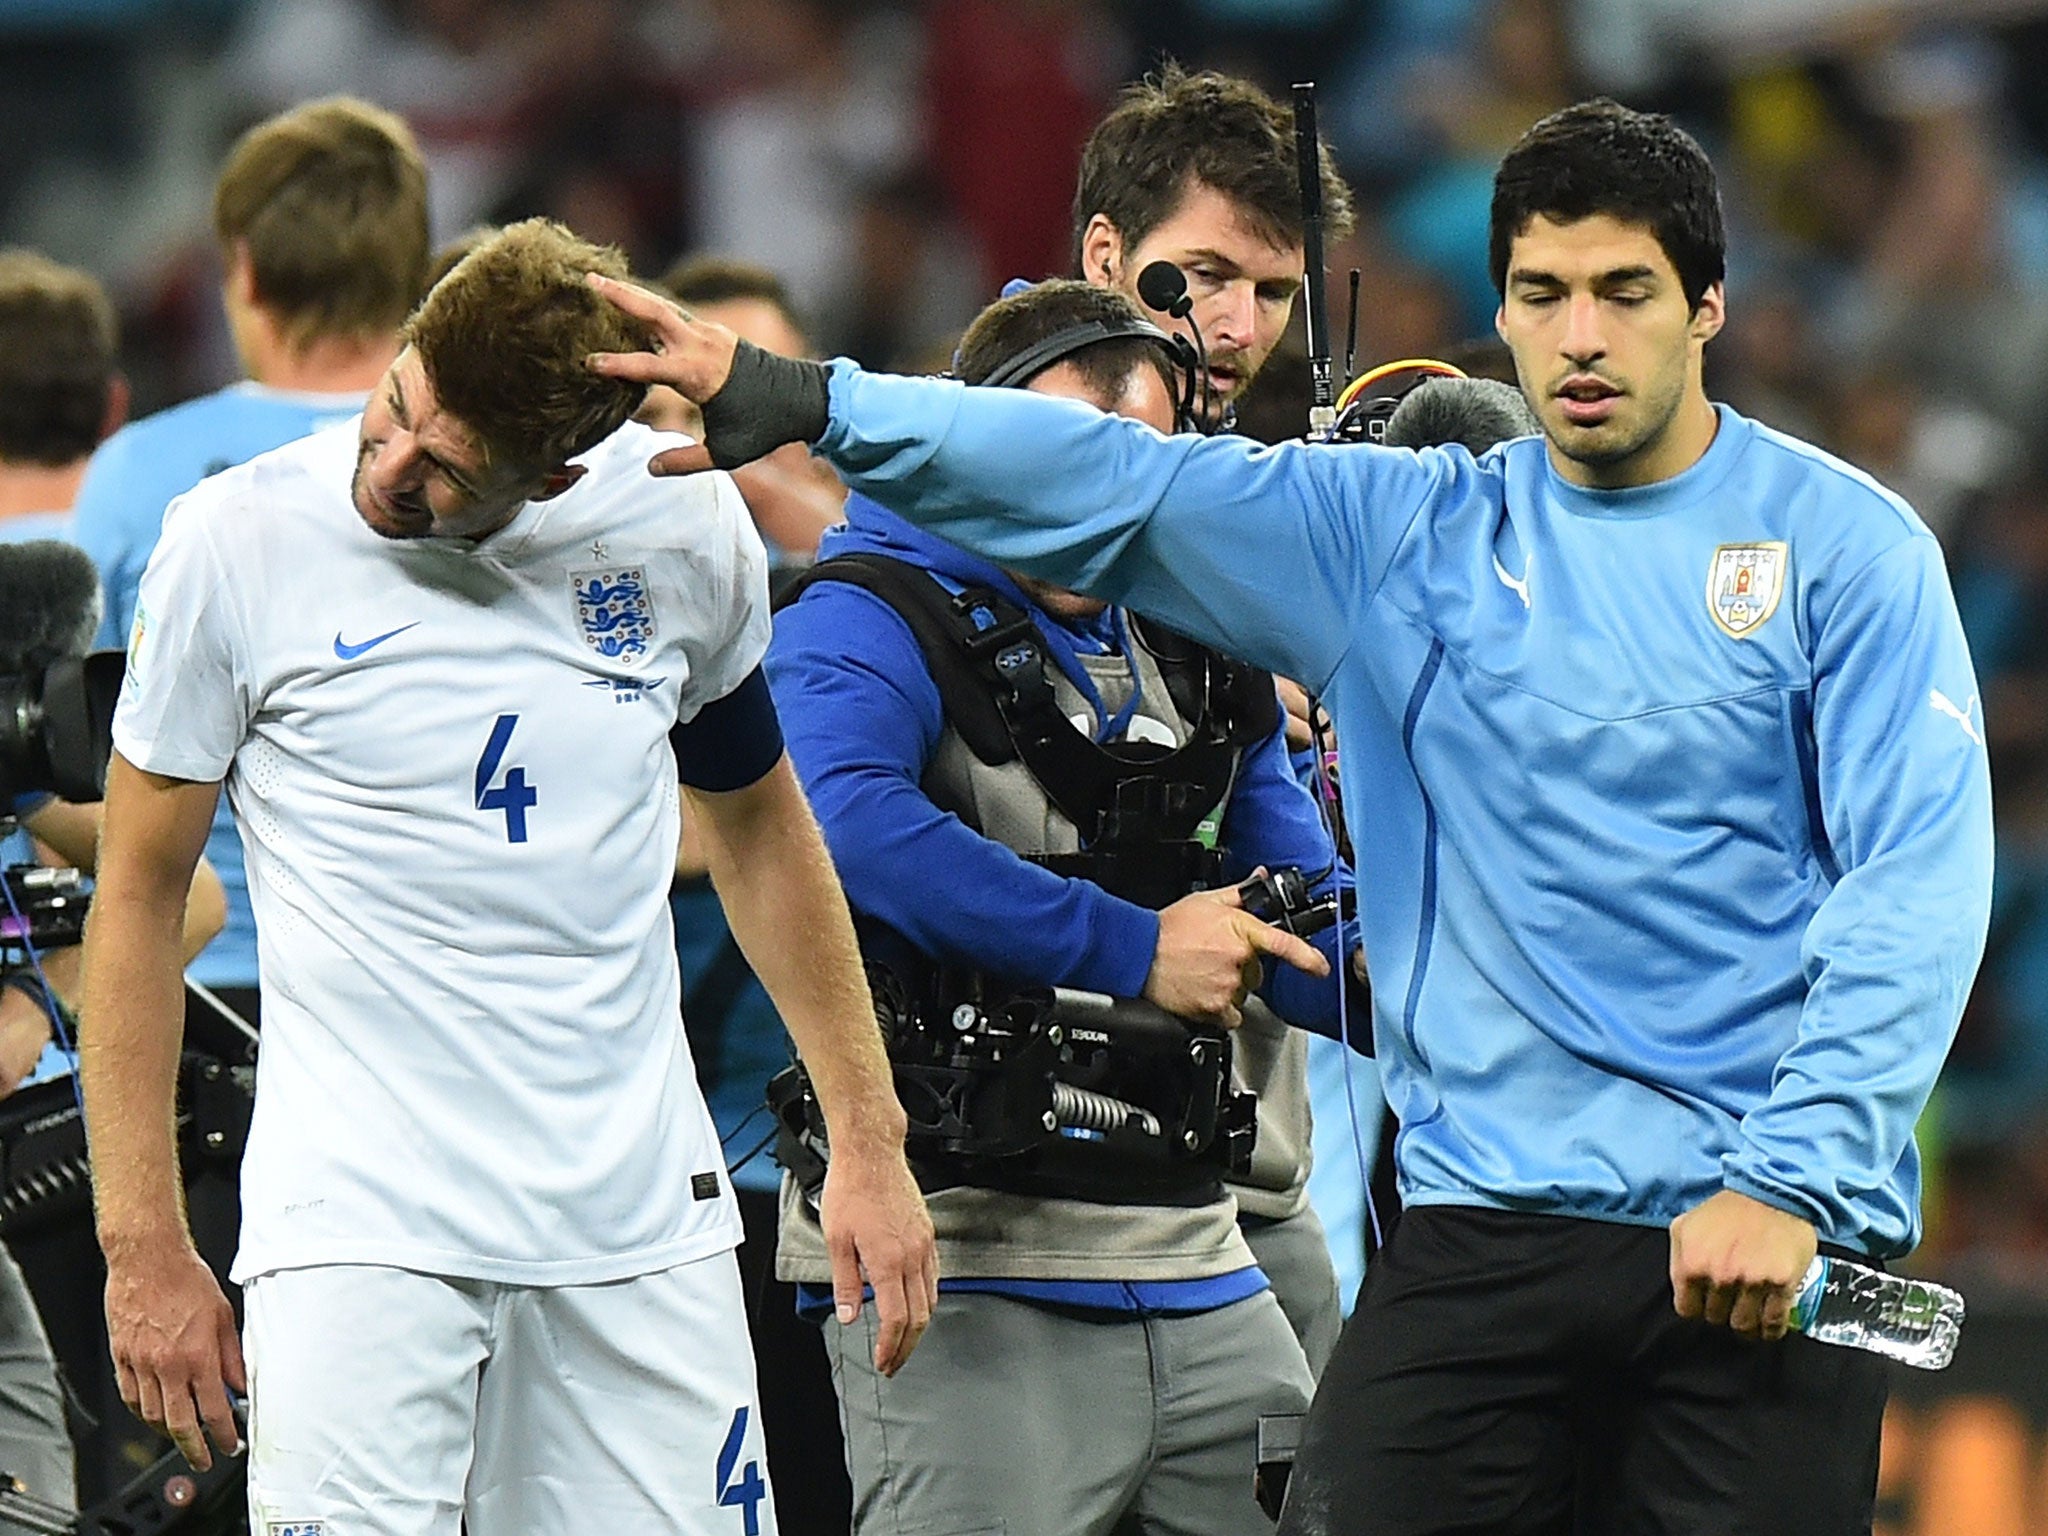 Gerrard's former team-mate Luis Suarez scored twice to eliminate England from the World Cup